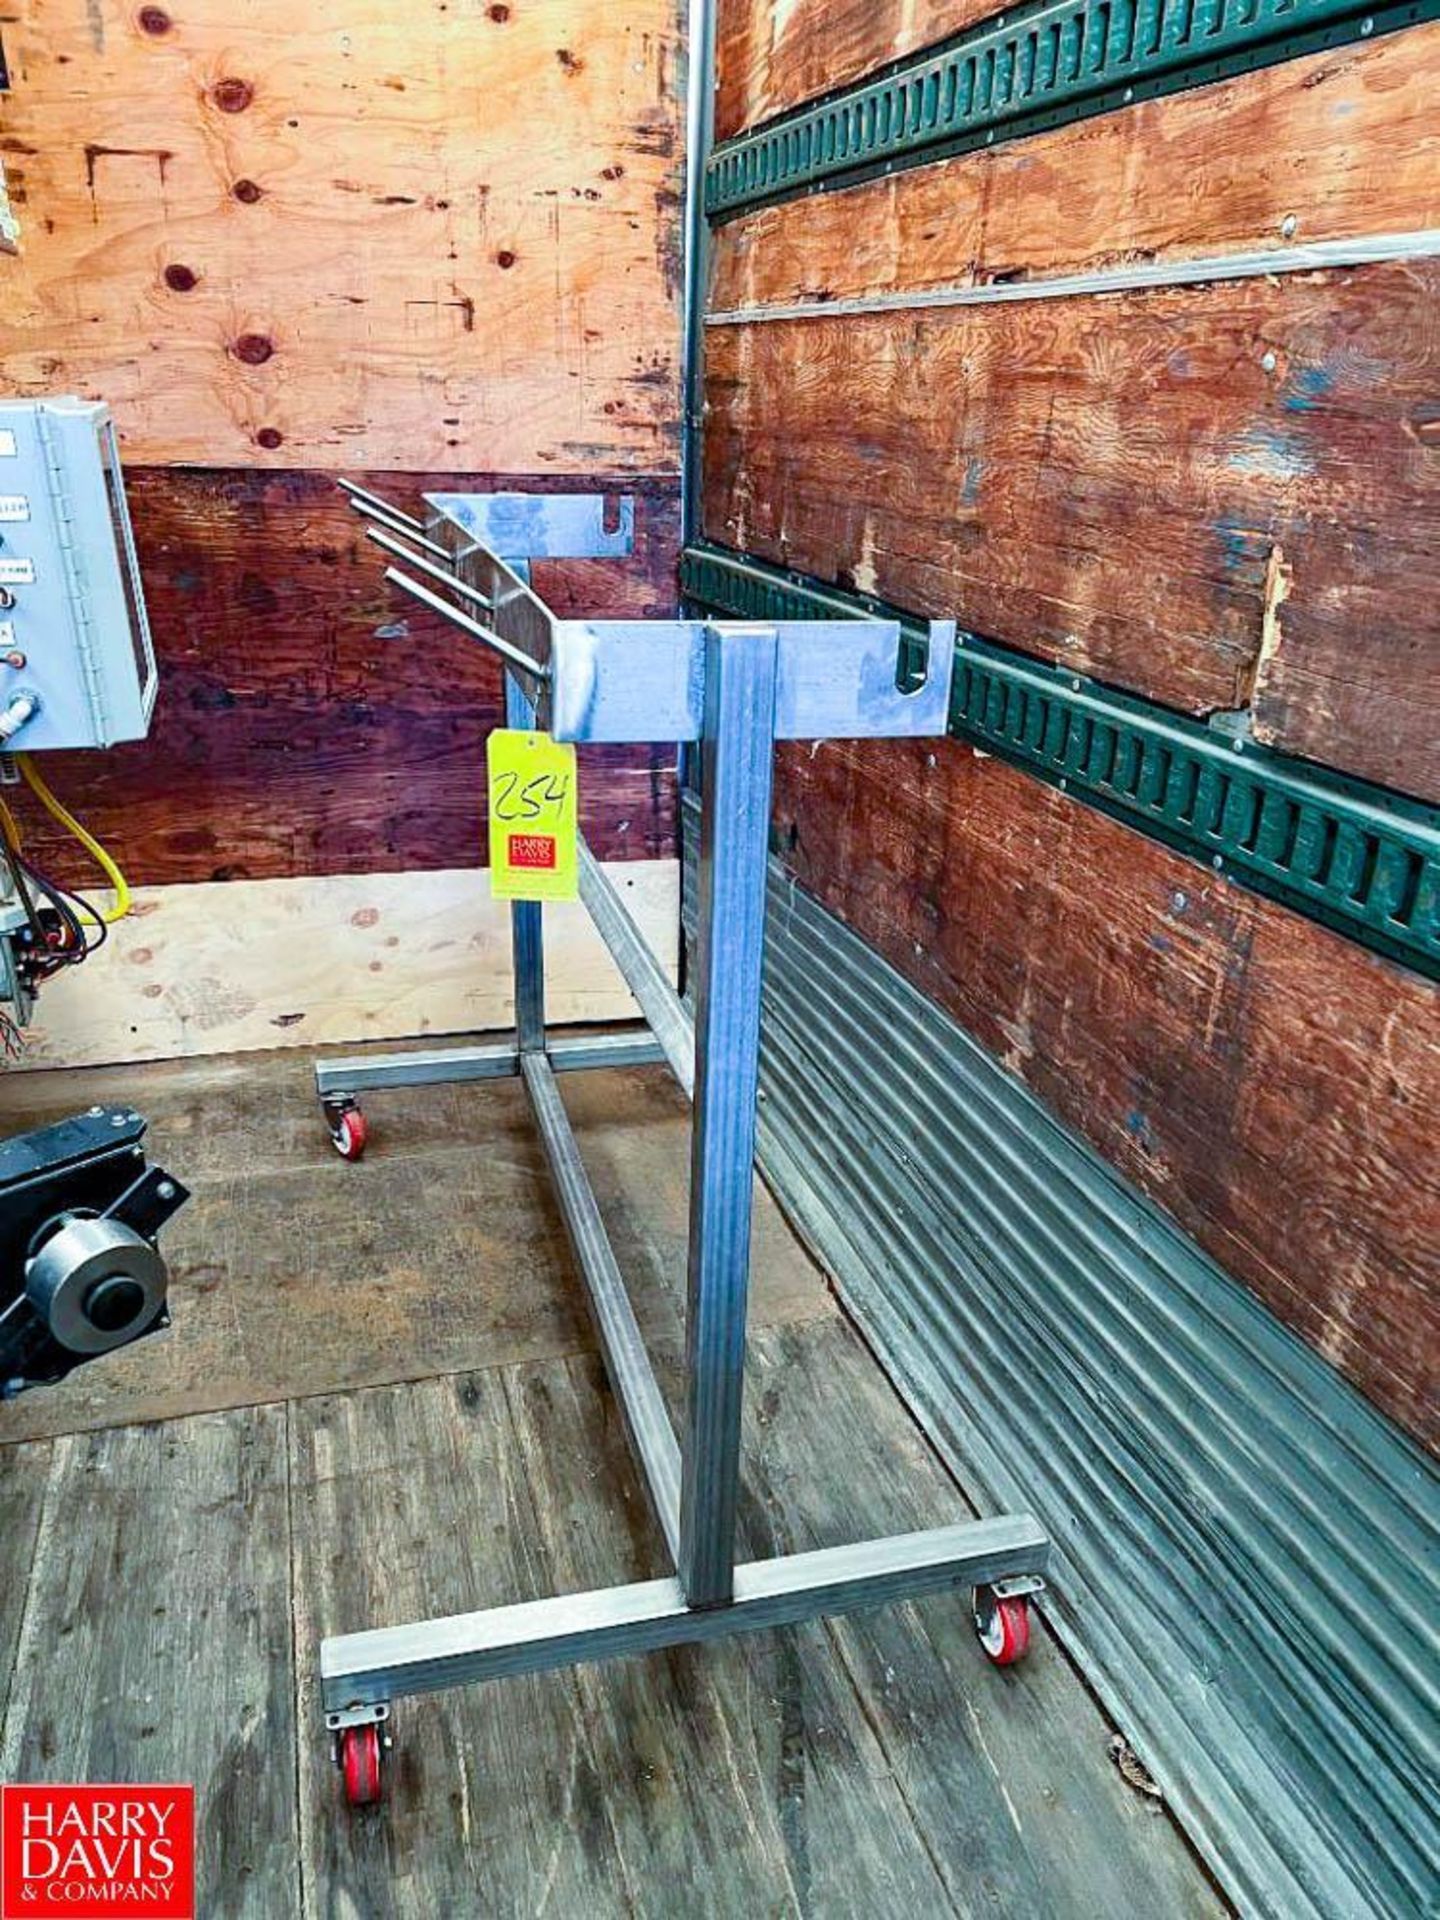 S/S Mobile Rack, Dimensions = 58" Width (Location: Louisville, OH) - Rigging Fee: $150